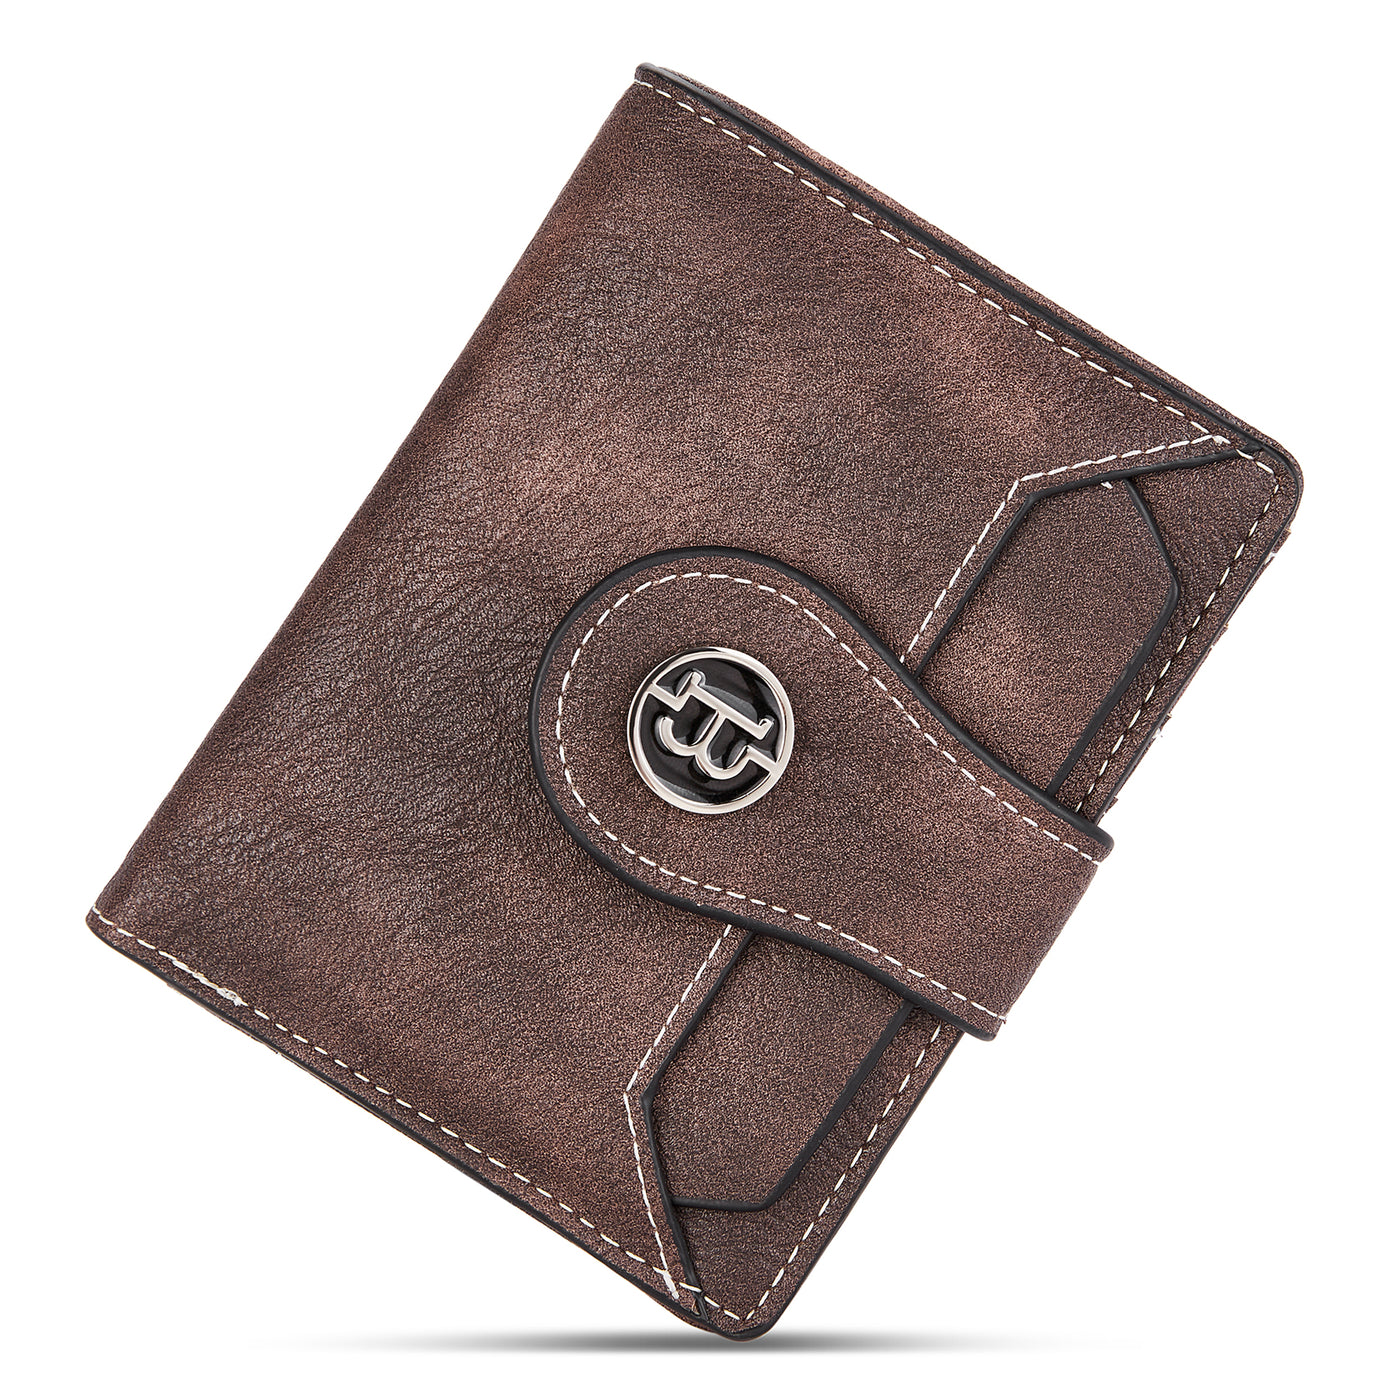 Lnna Hand Tooled Leather Wallet —— Genuine Leather